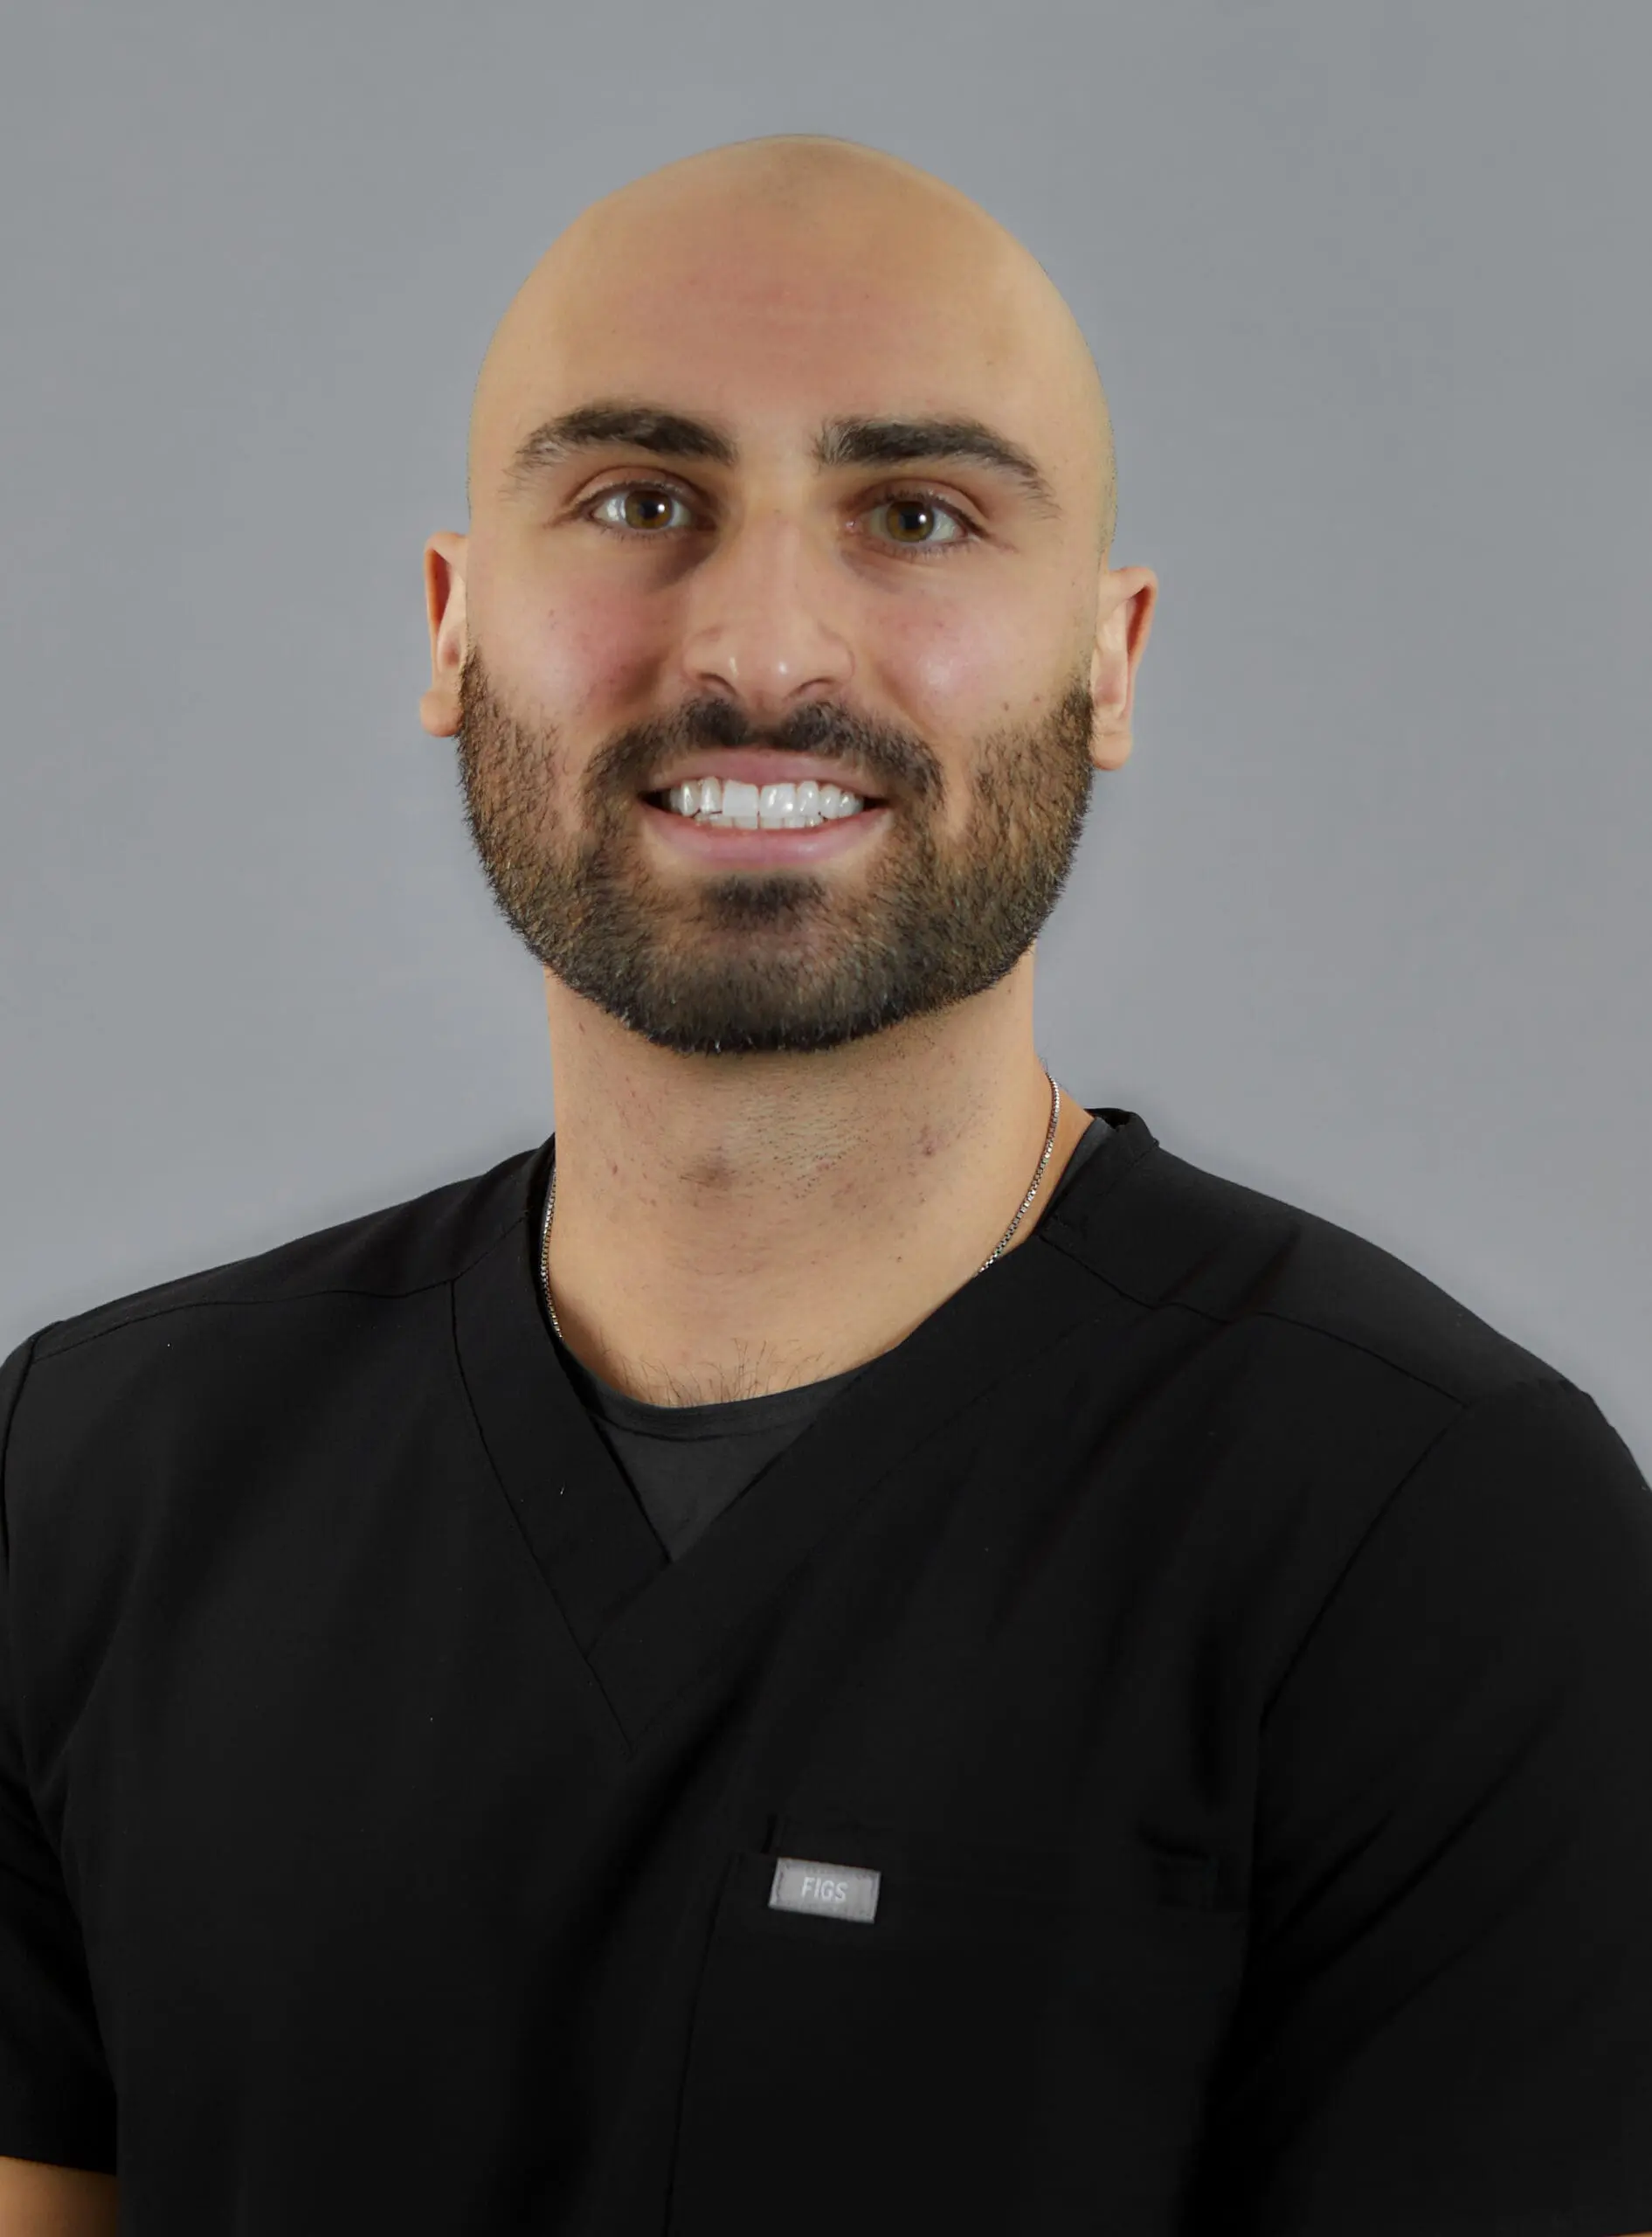 A photo of Dr. Ohan Manoukian, a general dentist, smiling warmly.